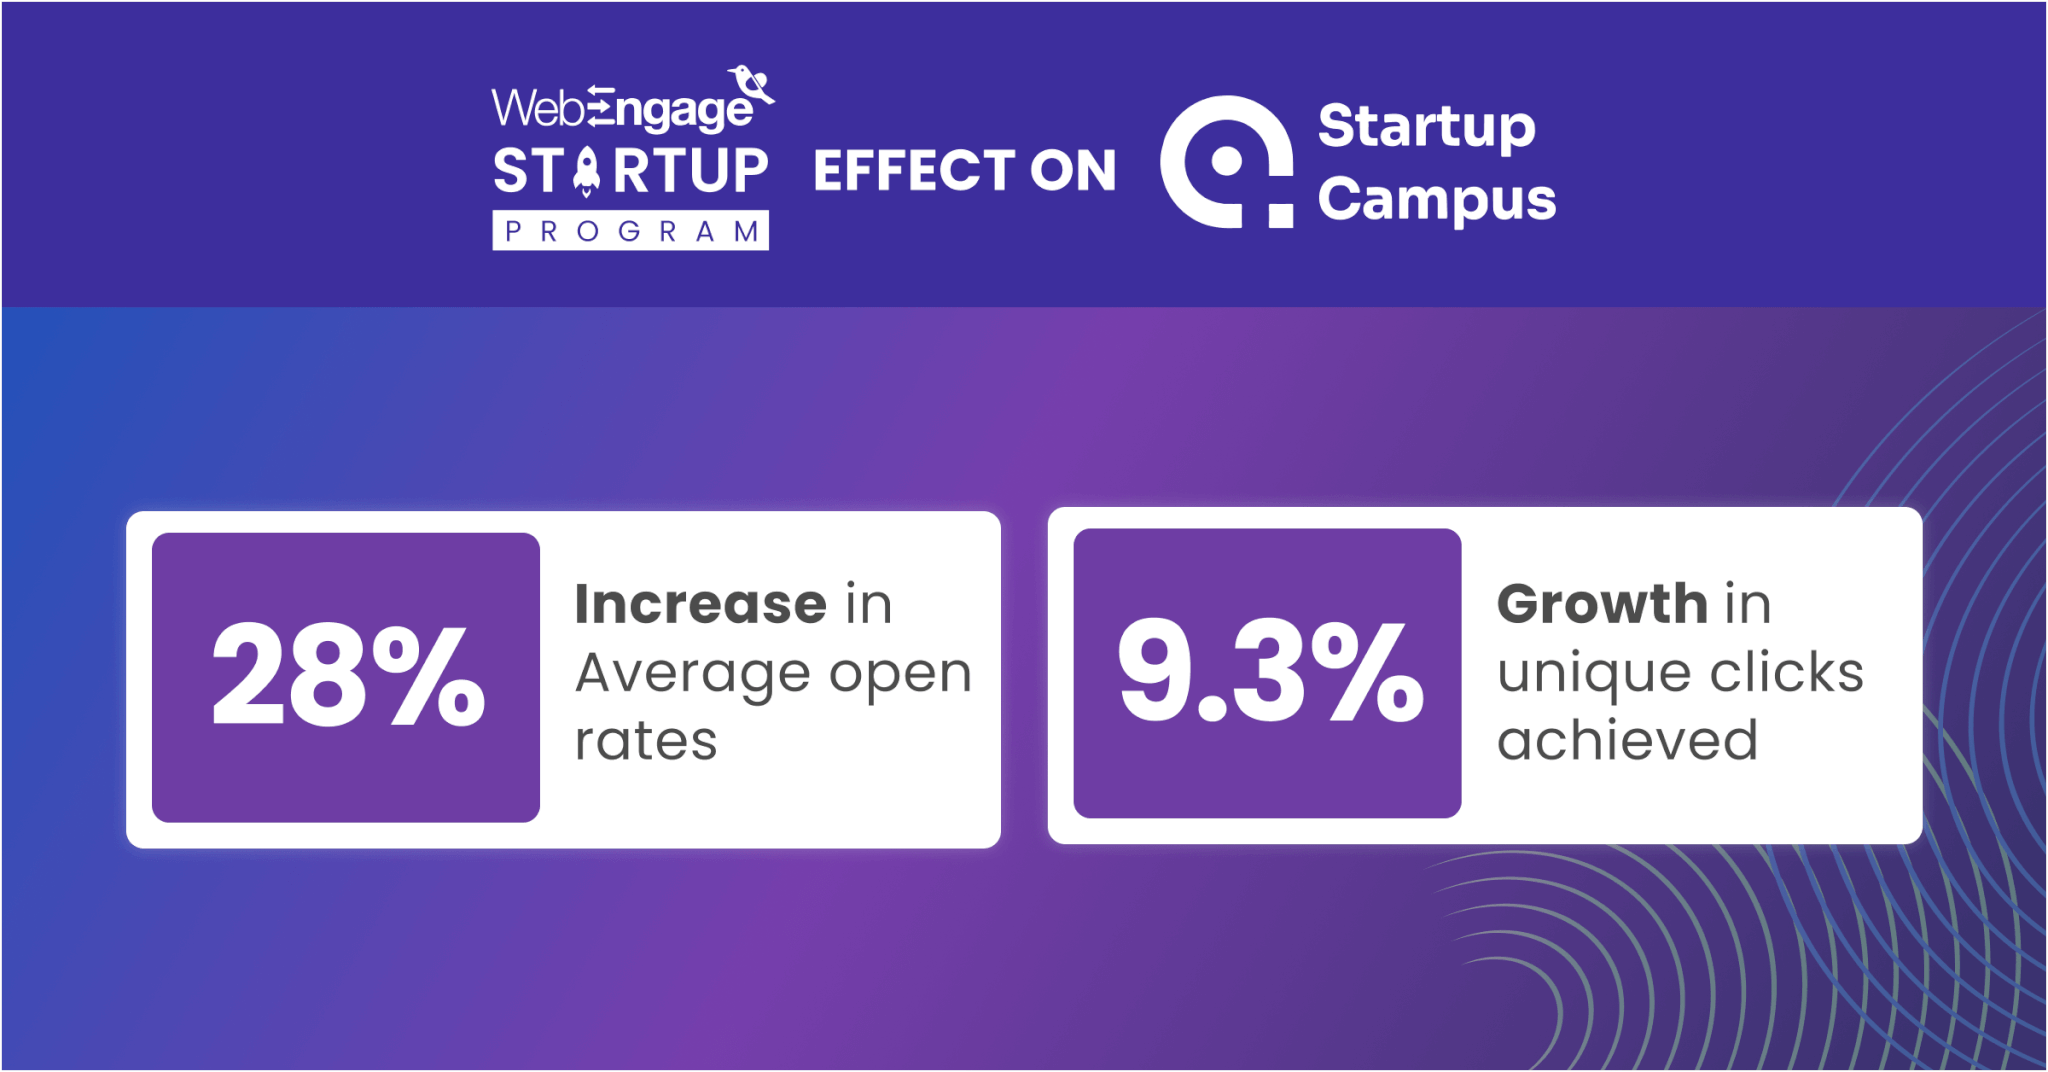 Results for Startup campus